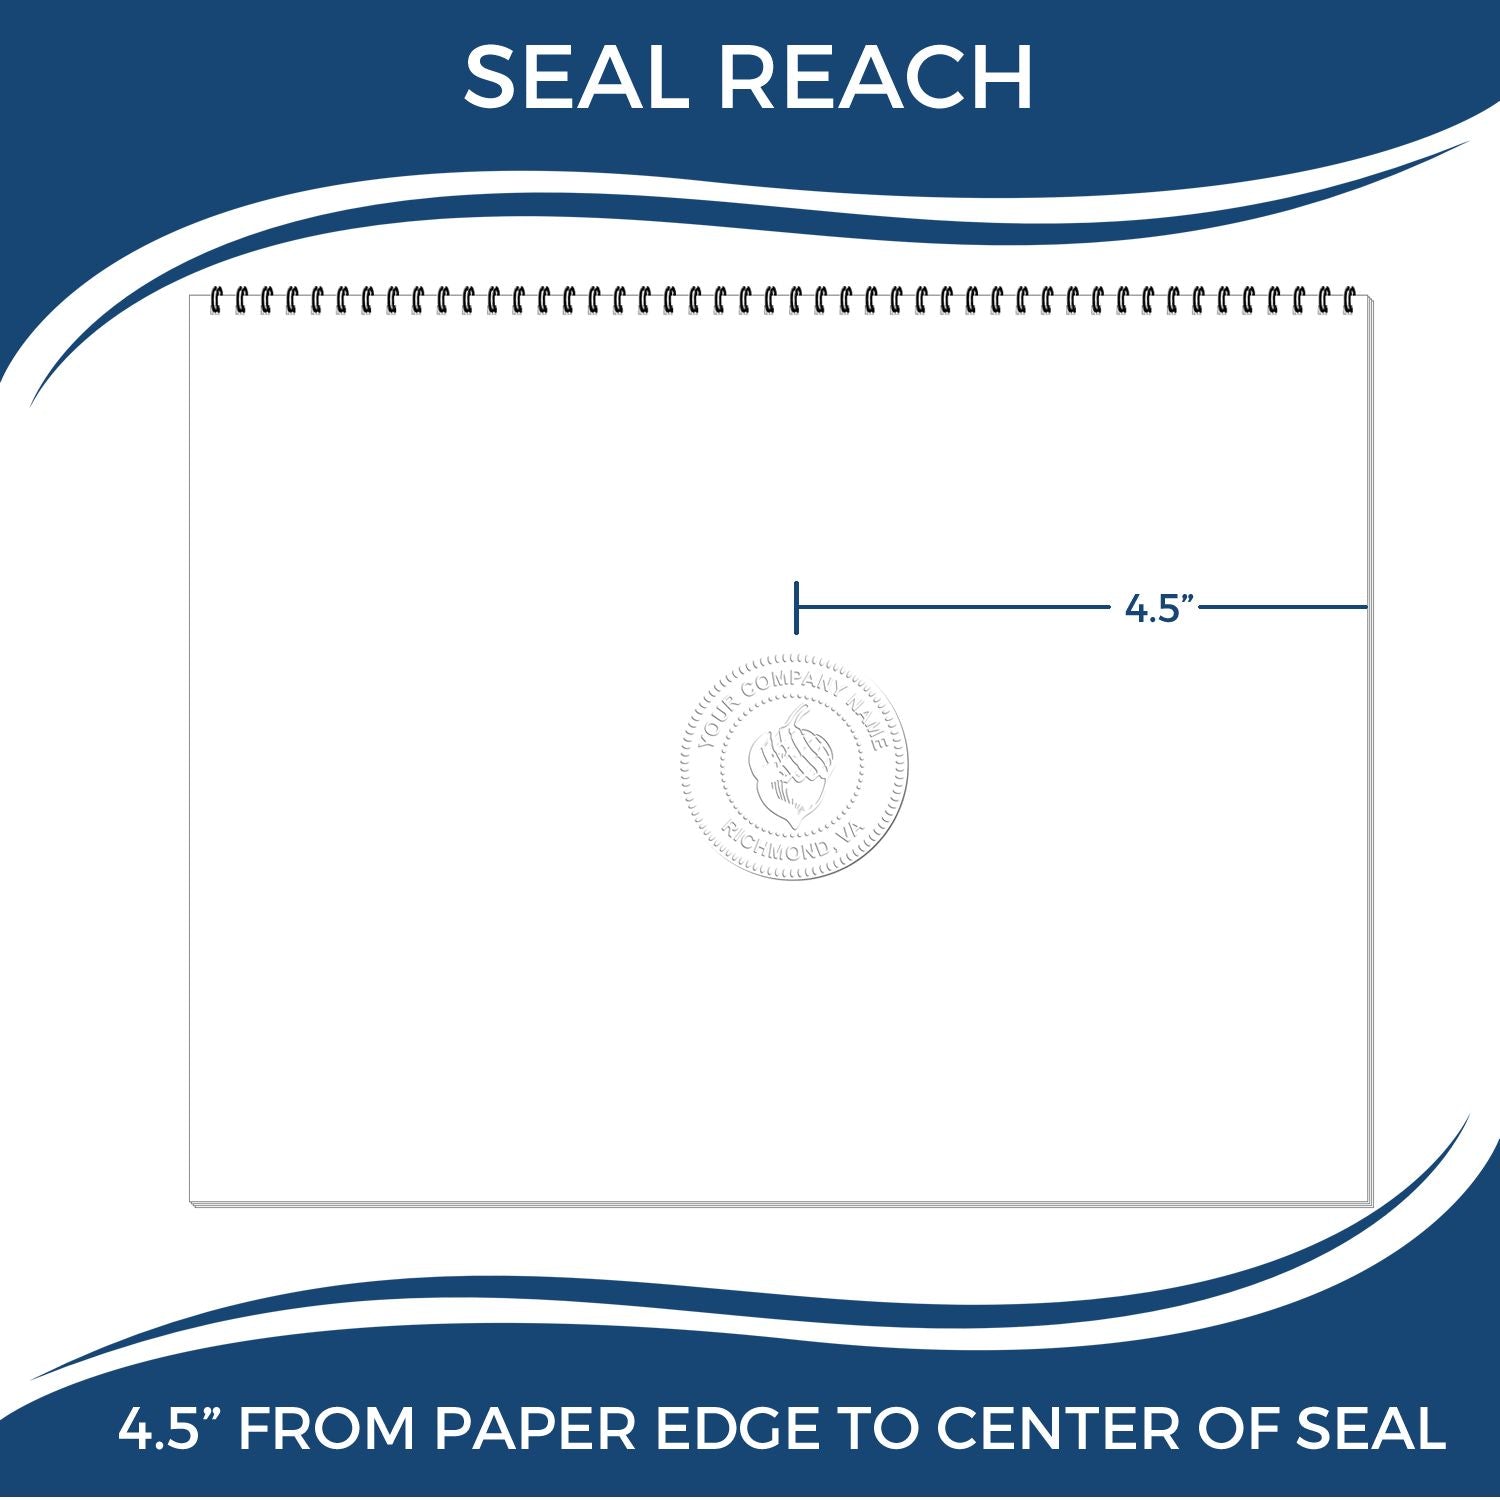 An infographic showing the seal reach which is represented by a ruler and a miniature seal image of the Extended Long Reach Arkansas Architect Seal Embosser